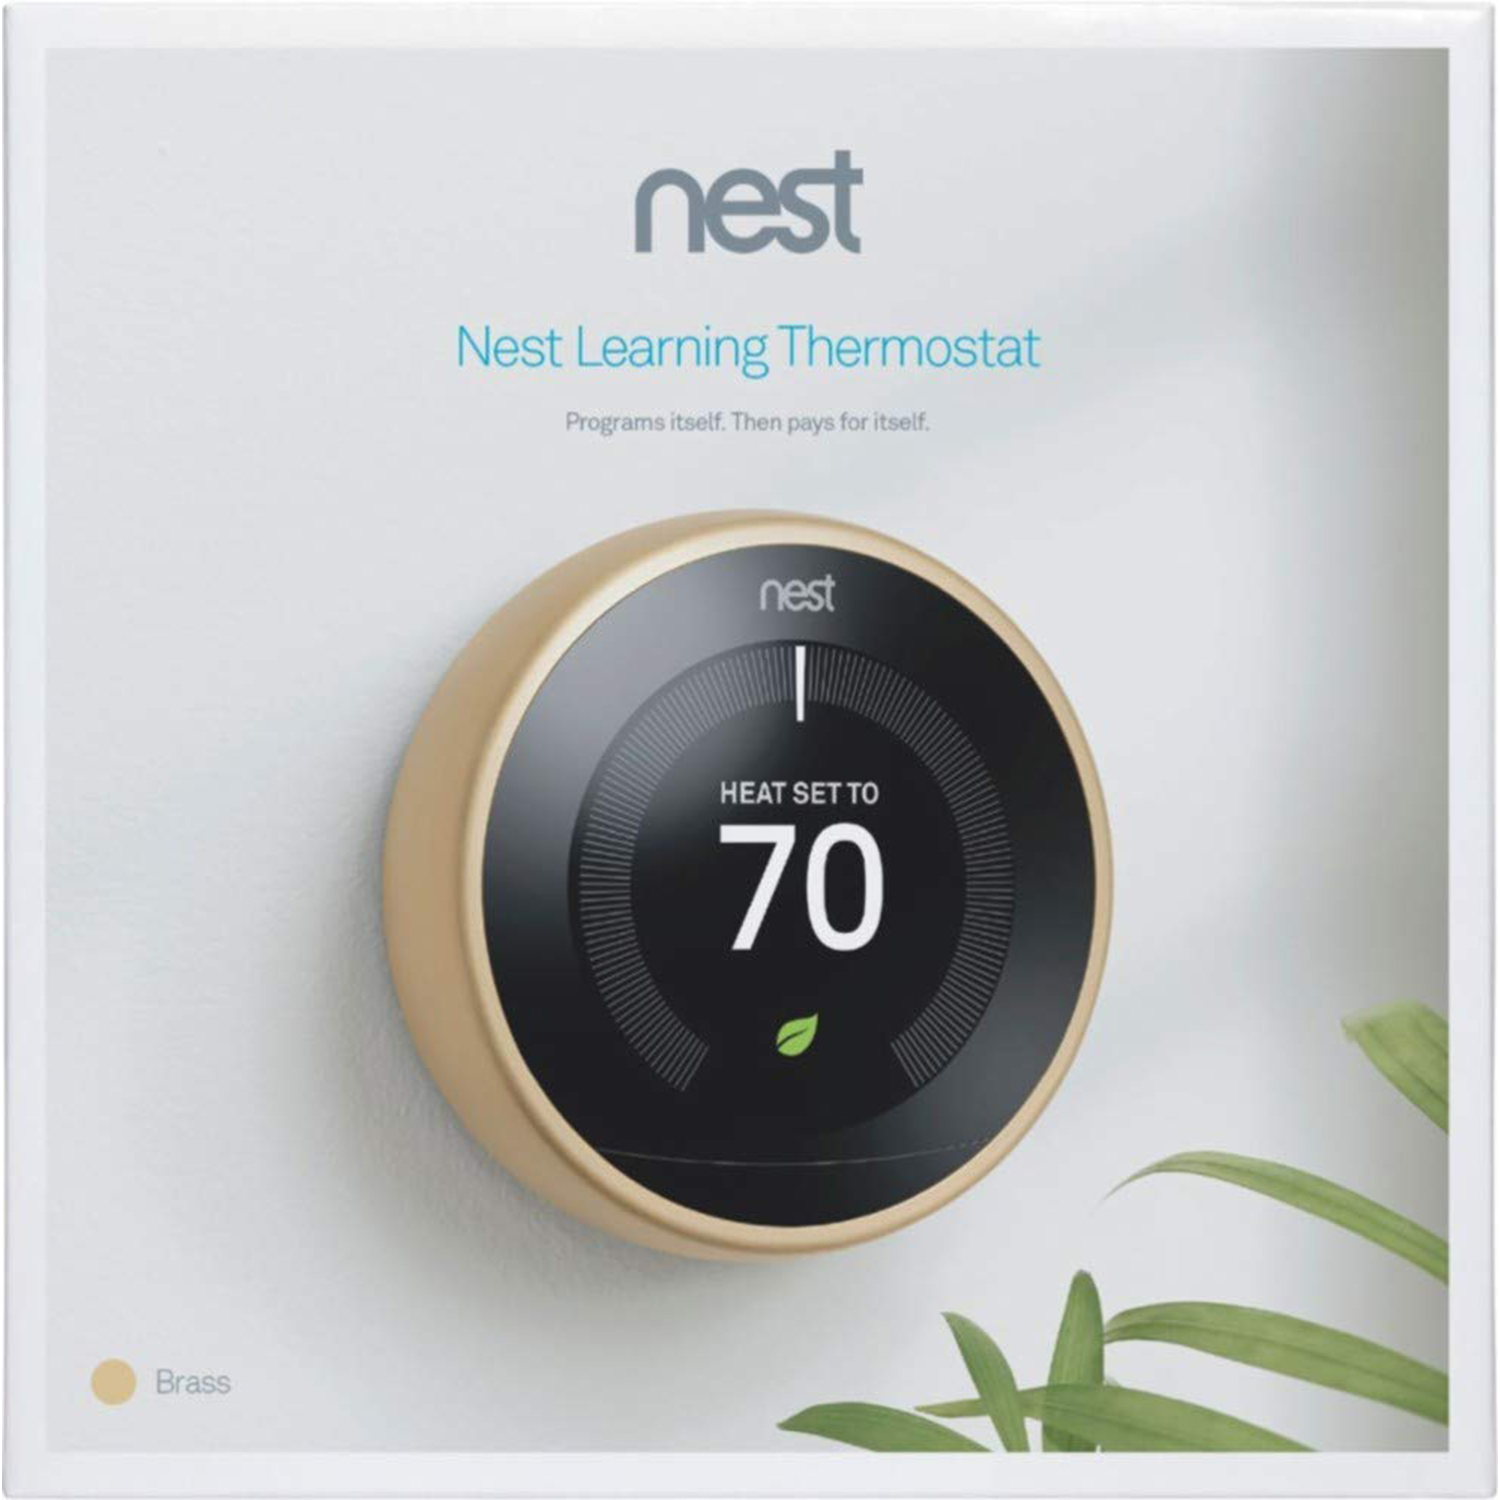 Nest T3032US Nest Smart Learning Programmable Thermostat - 3rd Generation, Brass - image 2 of 5